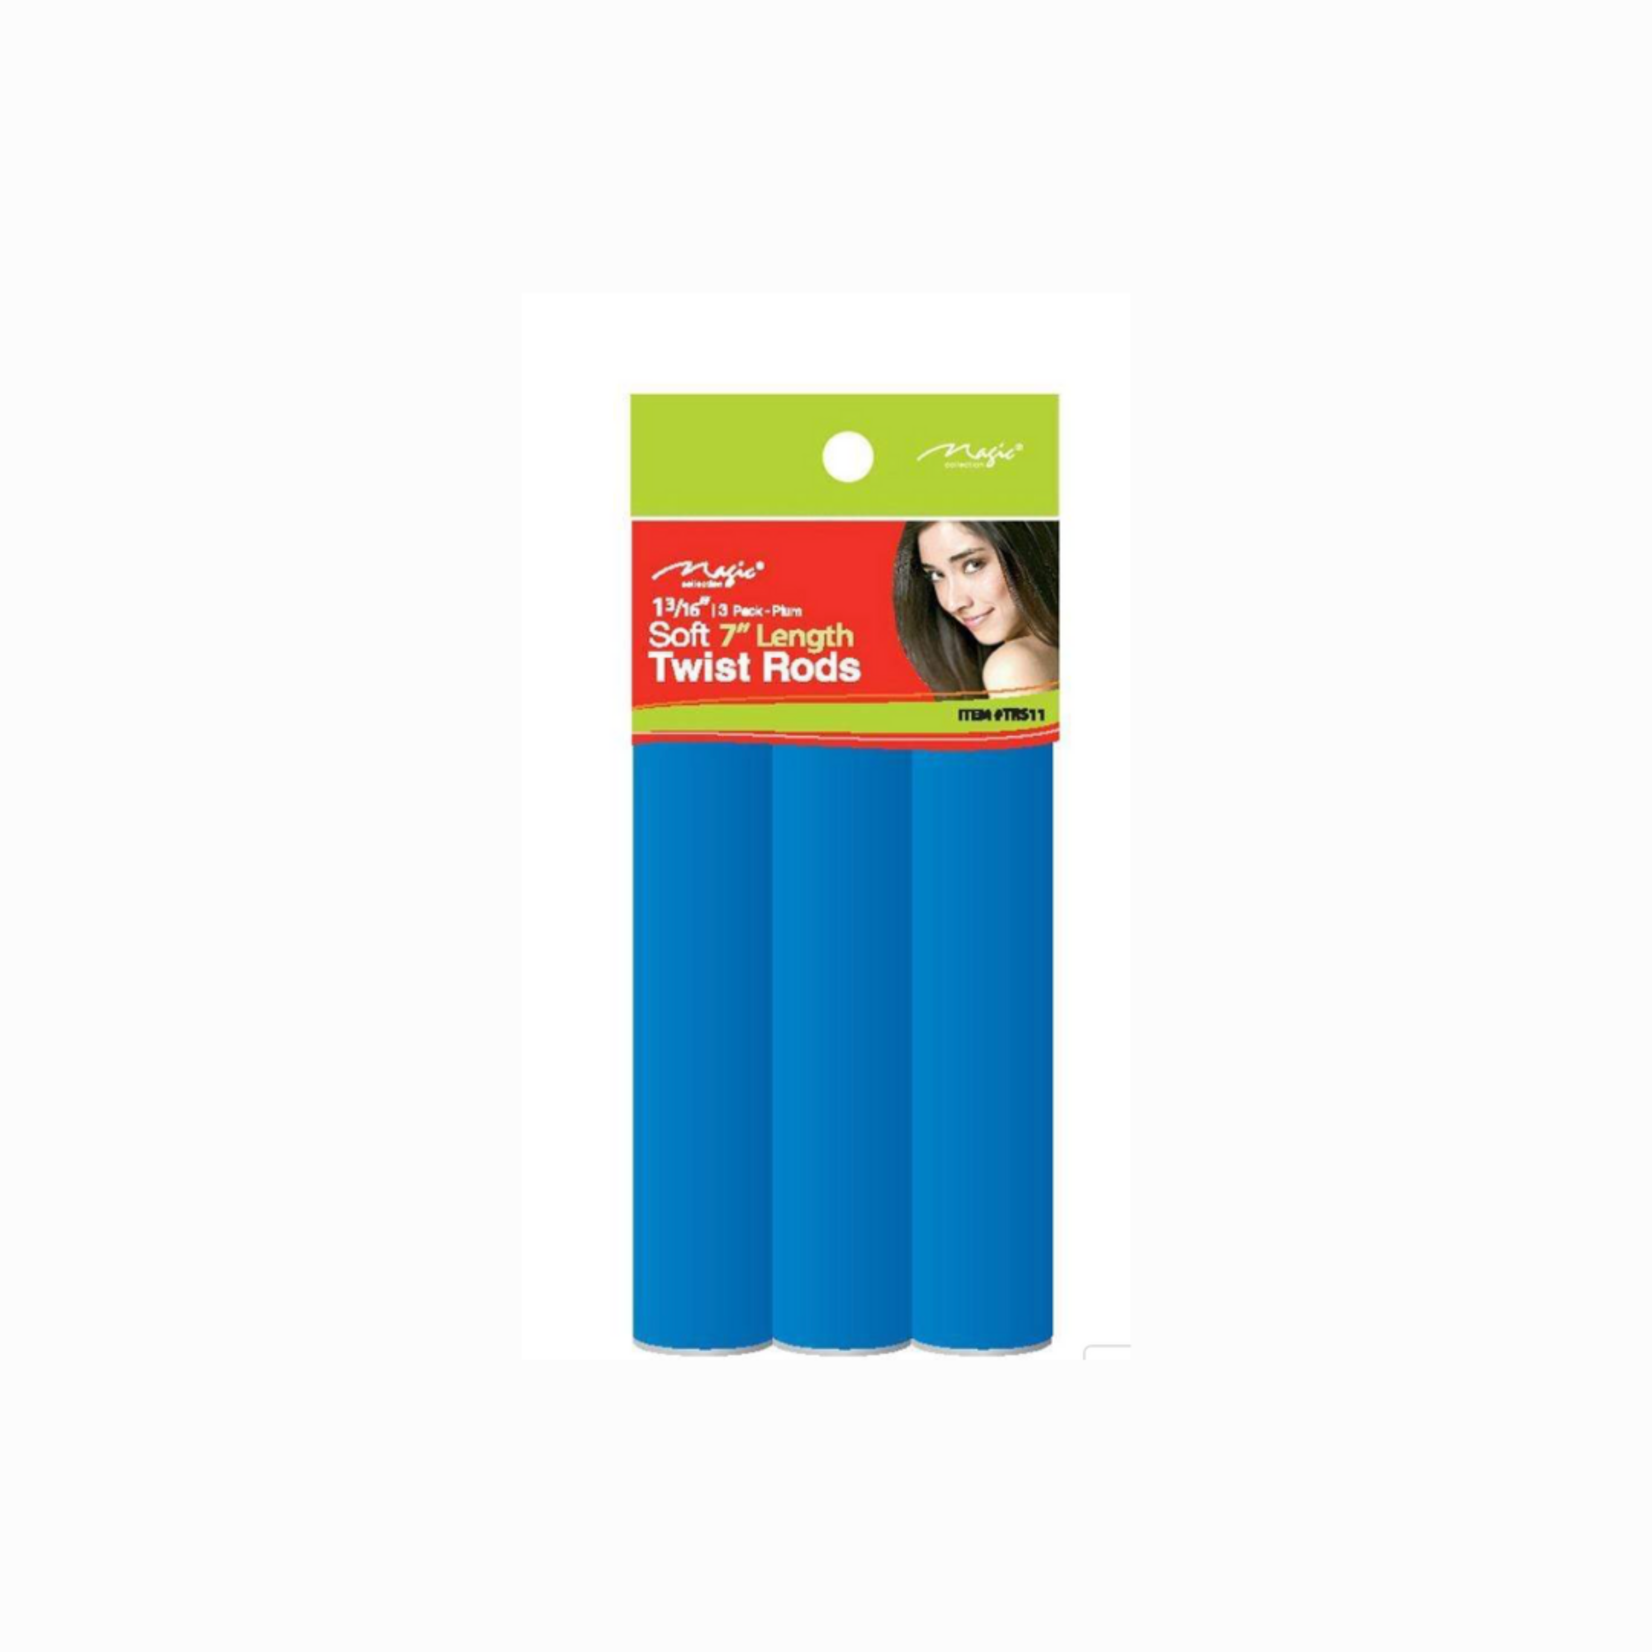 Magic Collection Magic 1 3/16" - 3 Pack Soft Twist Rods